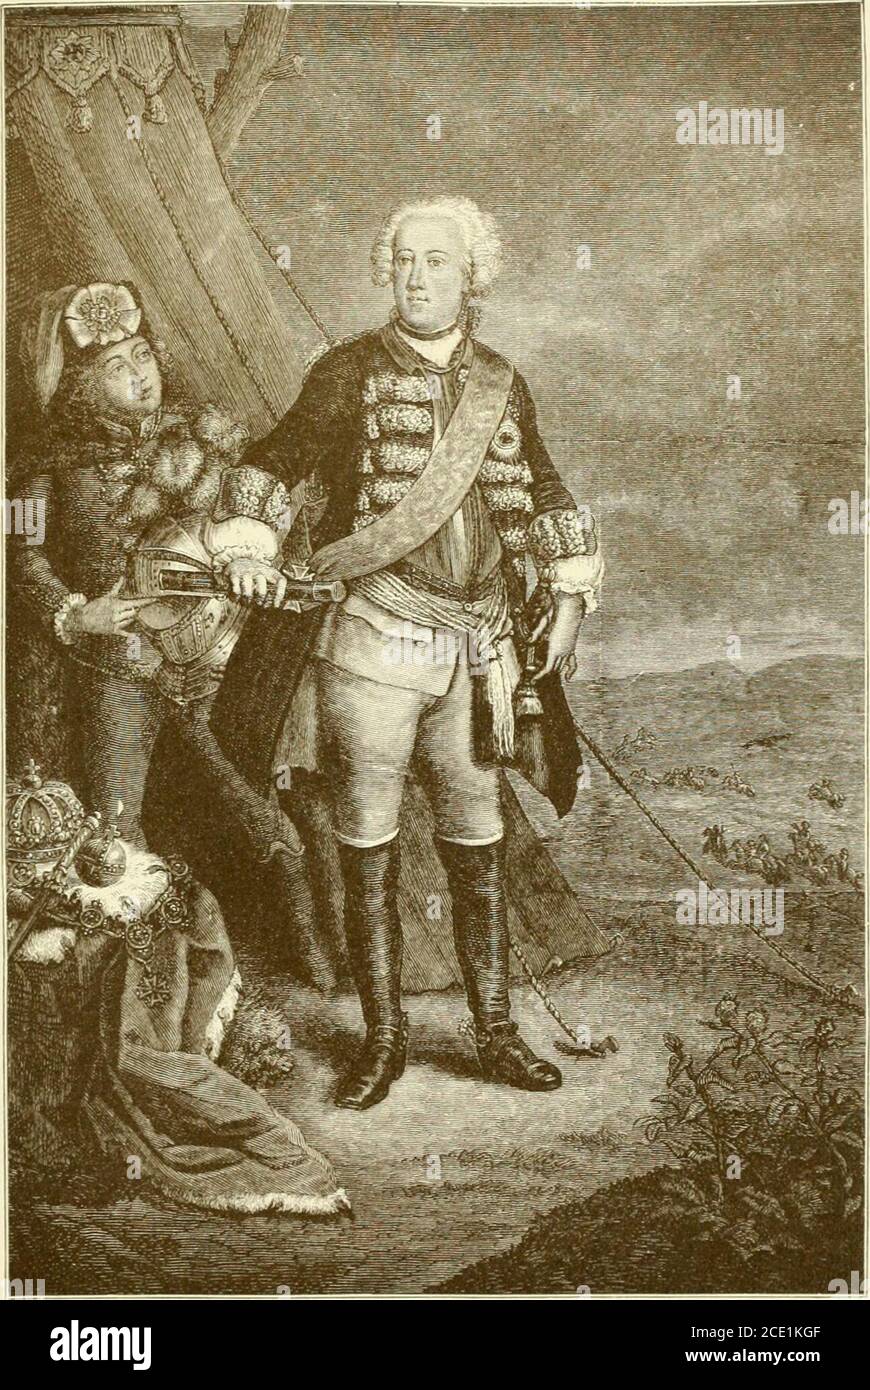 . A history of all nations from the earliest times; being a universal historical library . to his station, dressed with elegance, and avoided labors and PLATE XII.. Crown Prince Frederick. From the original painting by Tlininas Huber (1701)177!)). Berllu, Uobenzollern Museum in the Palace of Monbijou.Hitlory of All Xalirm«, IW. XJ., lini/f lit. FREDE HICK A XI) HIS FA TITER. 213 deprivations, while lie foninMl a close friendsliip with two amiable,but dissolute, officers, Lieutenants von Keith and von Katte. Insuch company he was far too much addicted to the worst excesses,as he afterward ackn Stock Photo